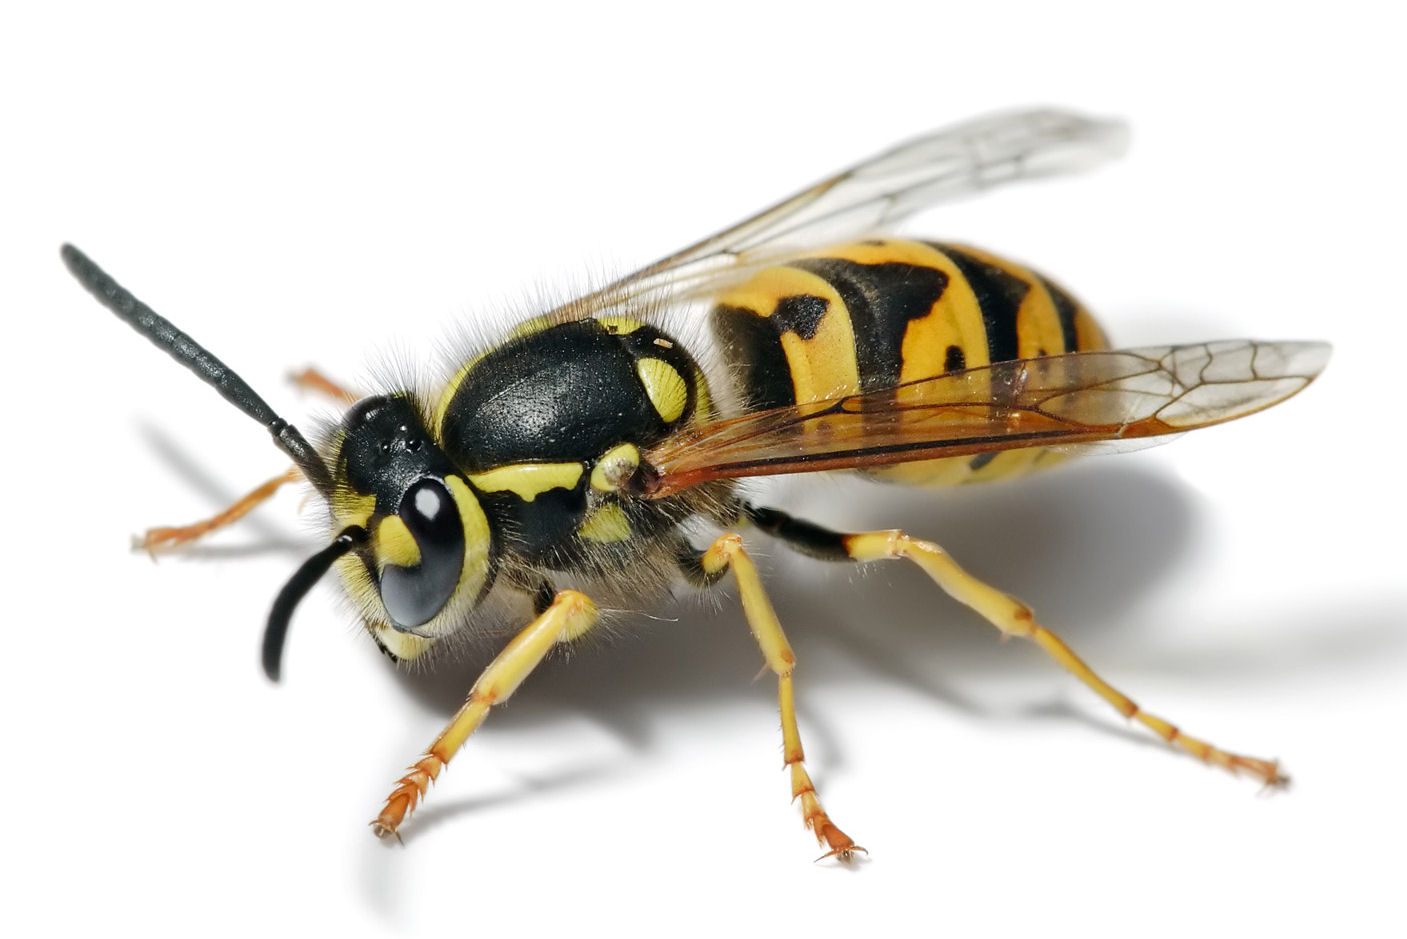 The difference between wasps and bees